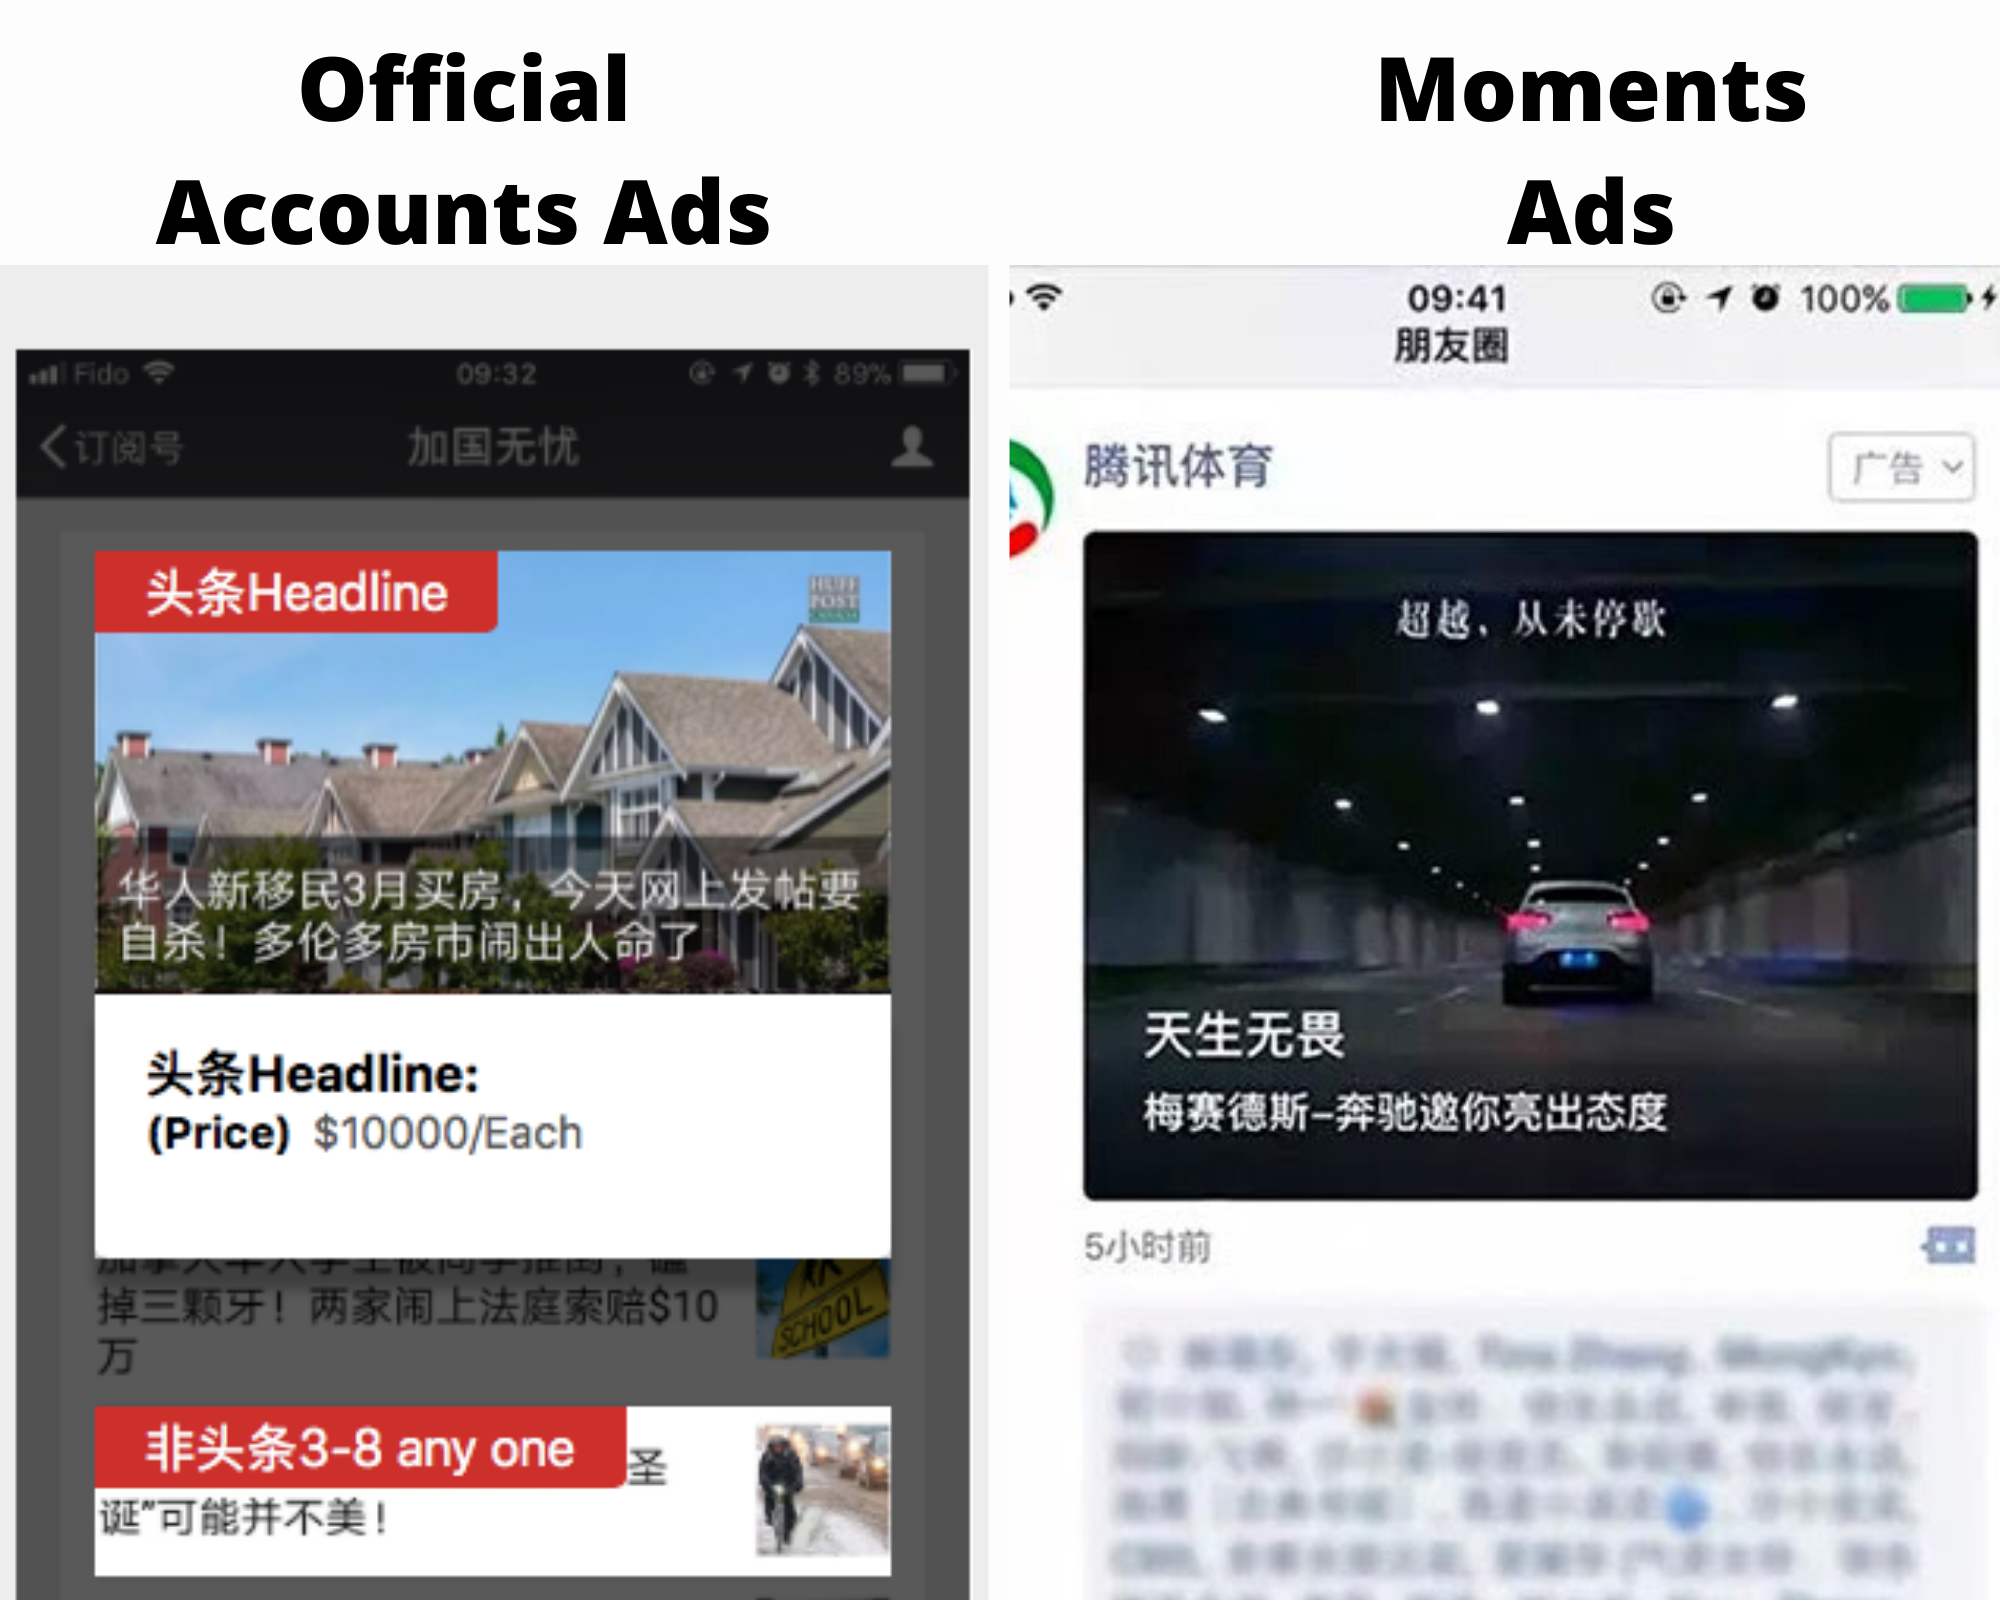 wechat ads category